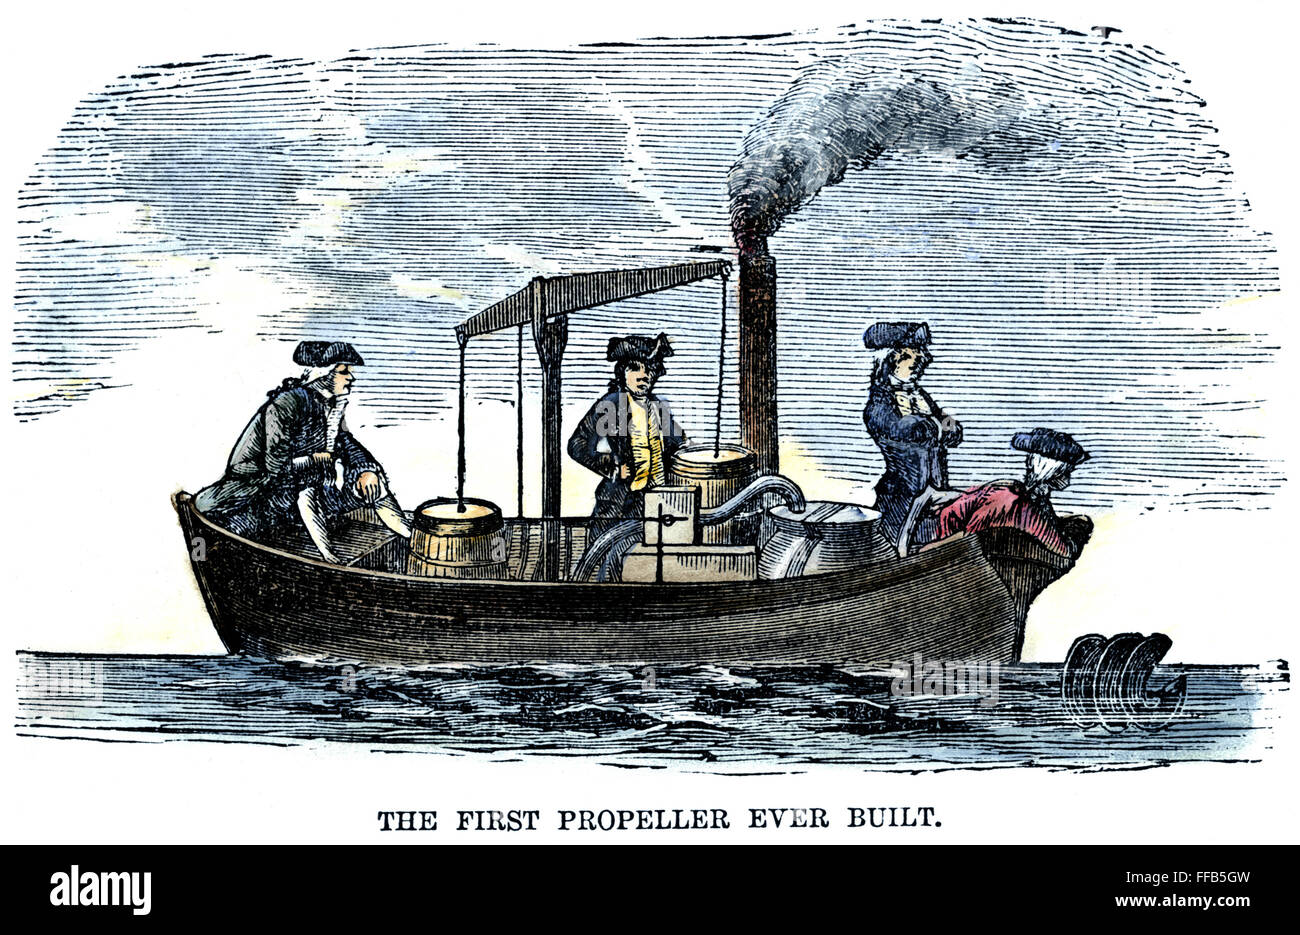 FITCH EXPERIMENT, 1796. /nJohn Fitch's experiment with a steam-powered screw propeller on Collect Pond, New York City, 1796. Color engraving, 19th century. Stock Photo